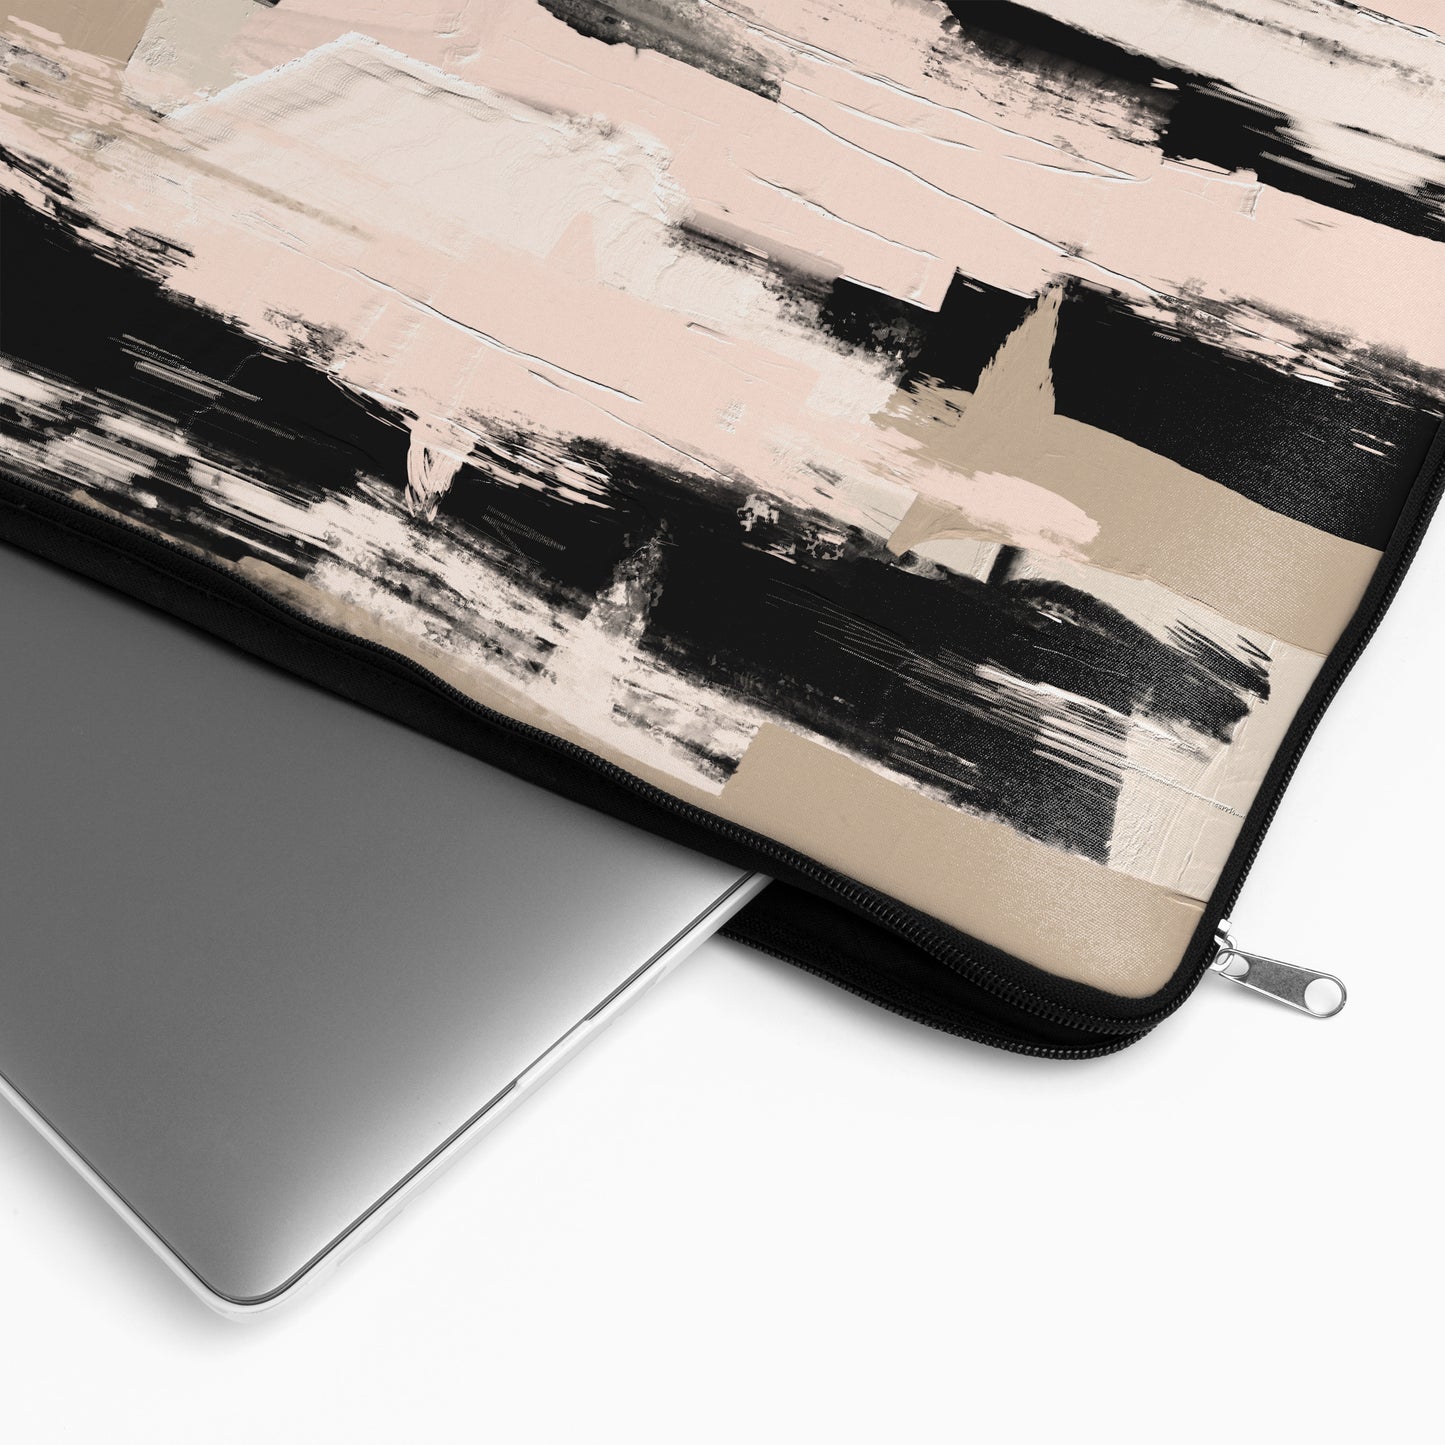 Beige Abstract Paintbrushes - Laptop Sleeve